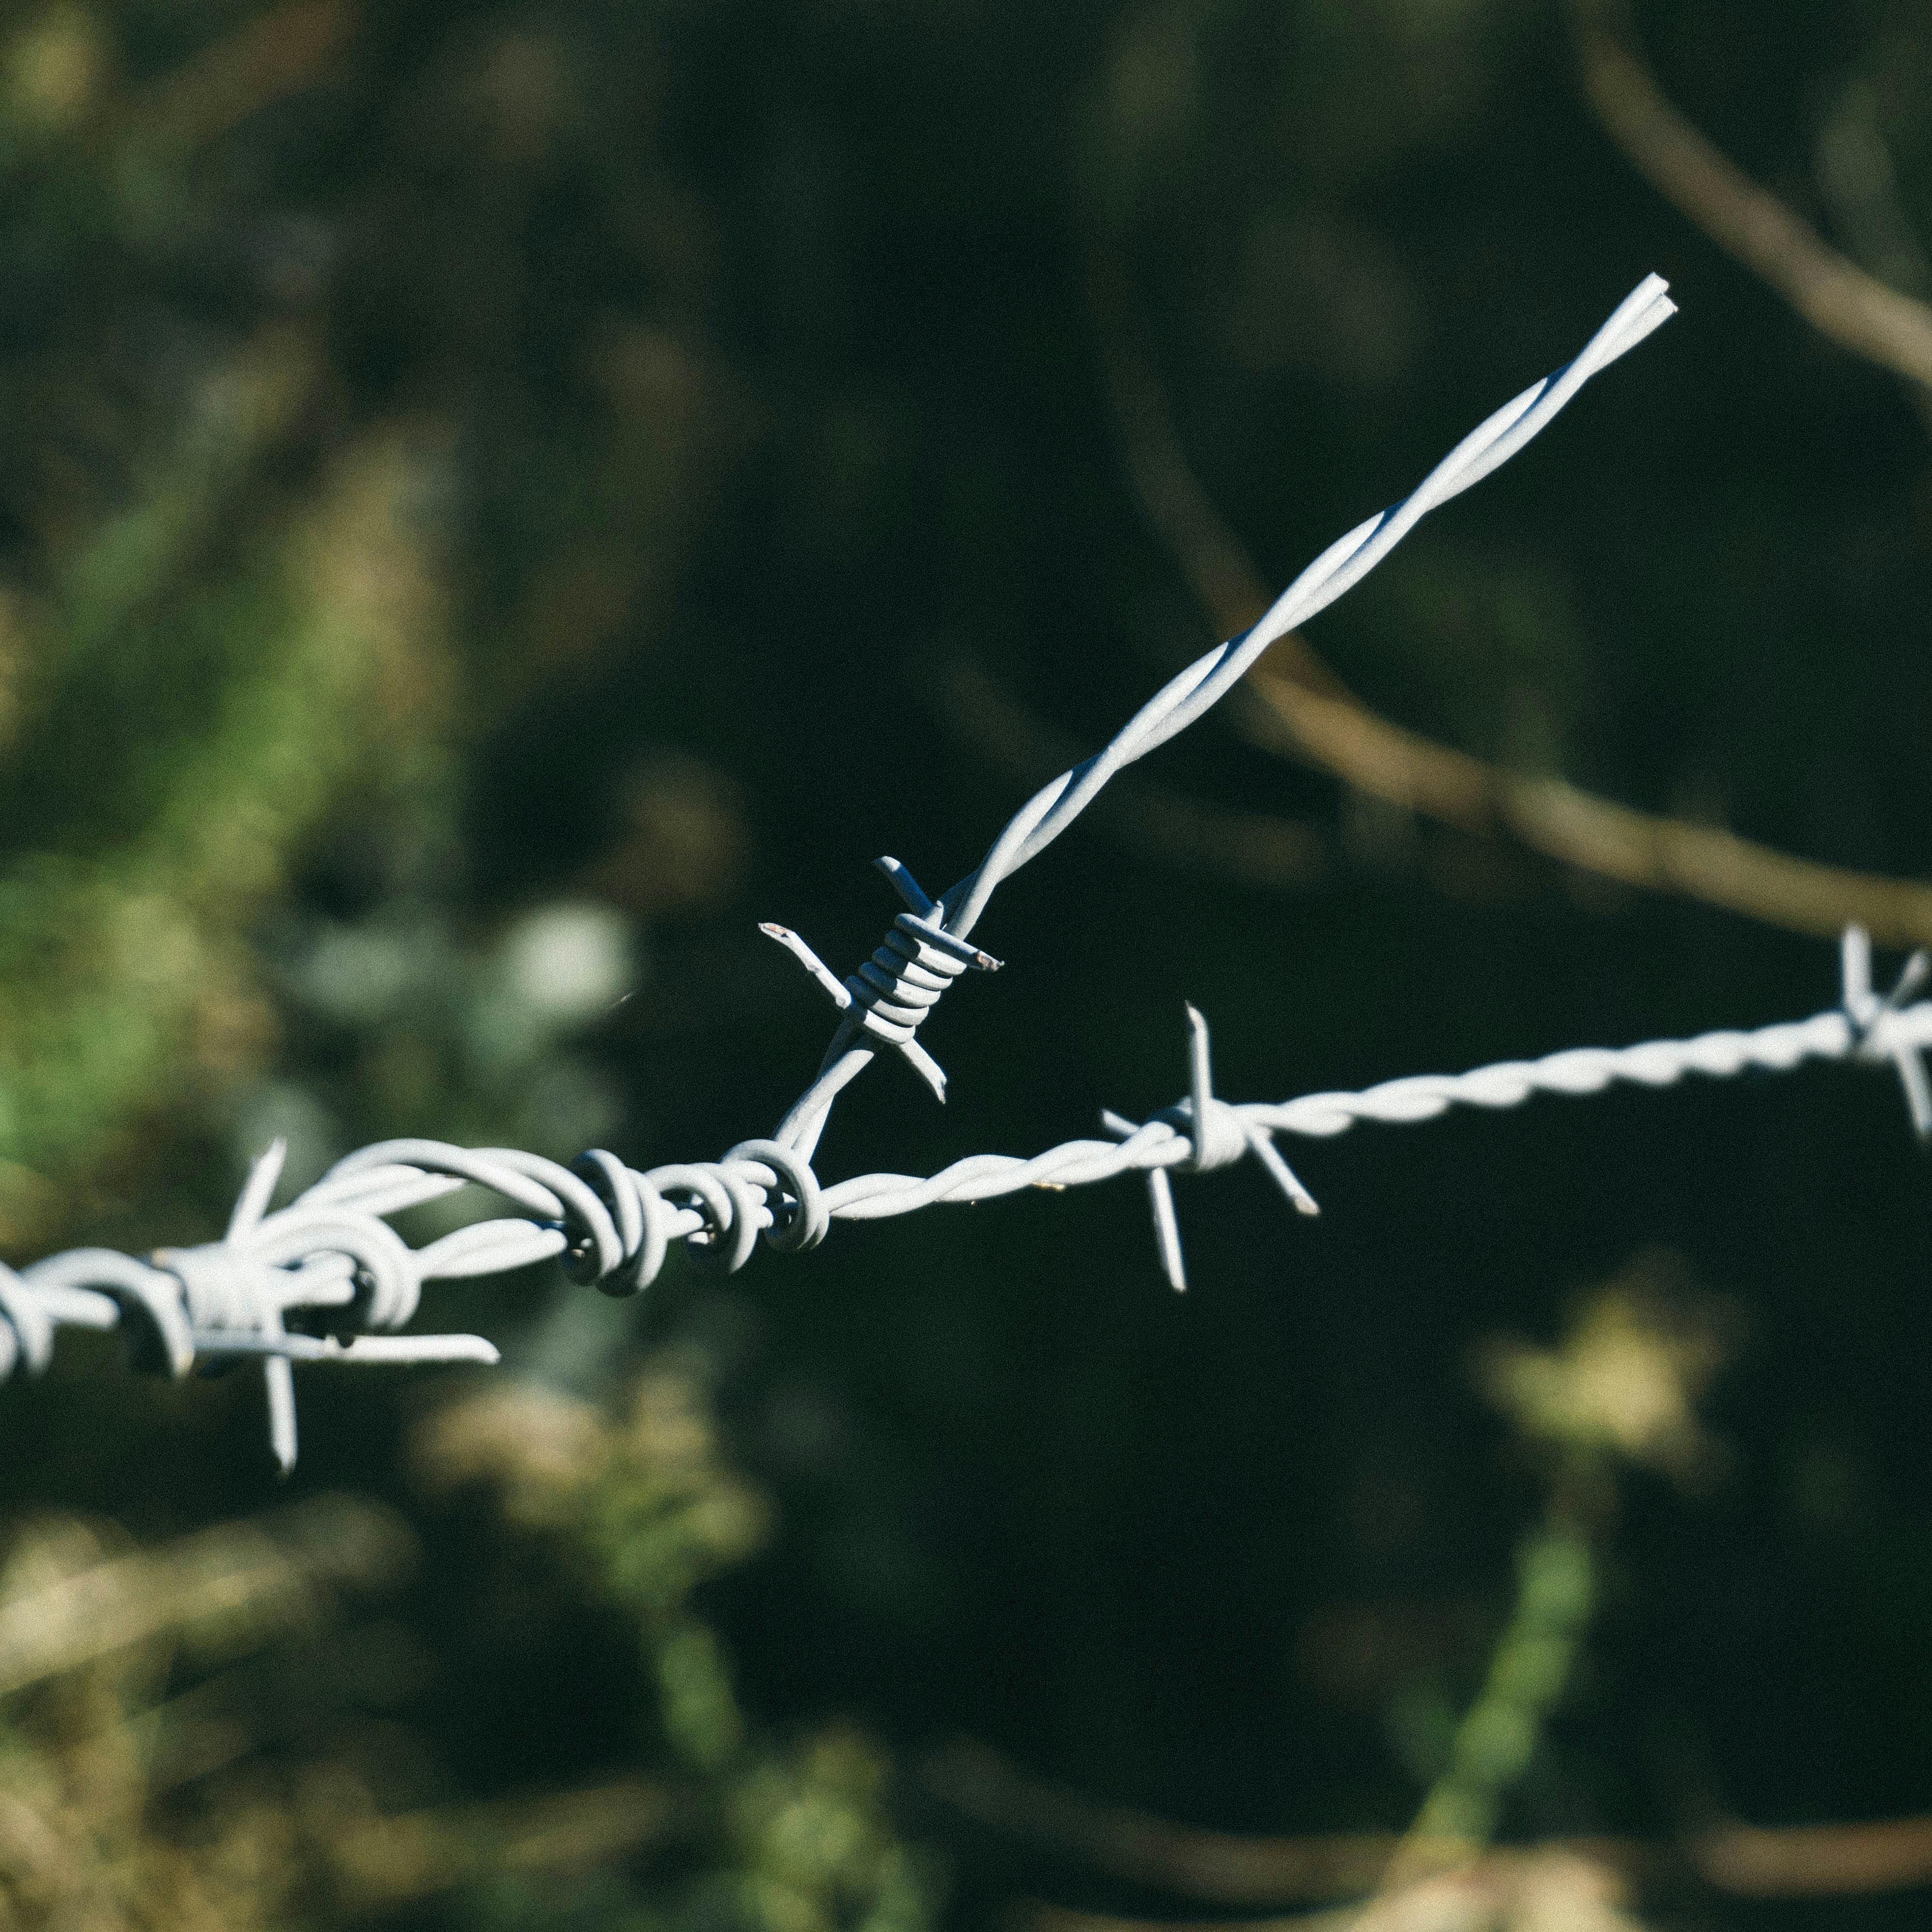 Free stock photo of barb wires, barbed wire